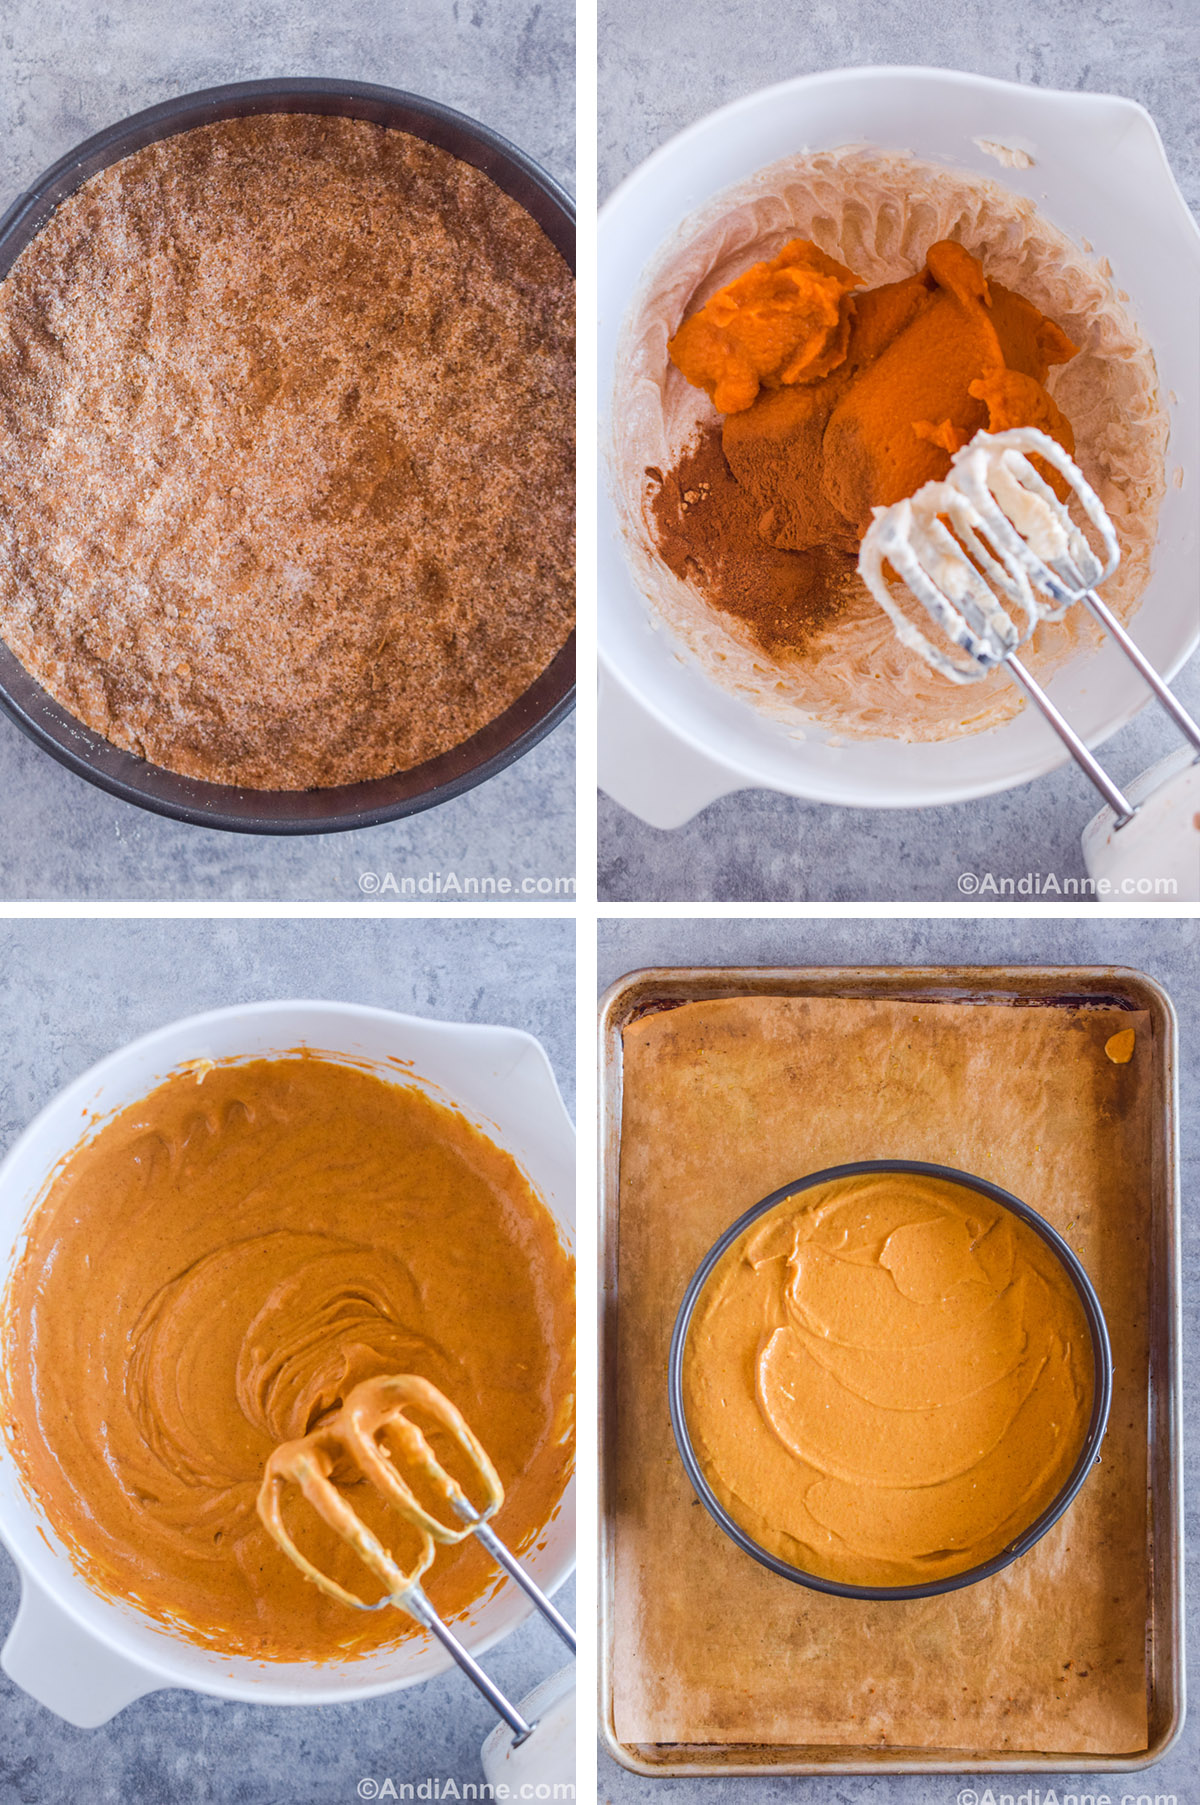 Four images showing steps to make recipe. First is a crust in a springform pan. Second is pumpkin puree and spices on top of creamed cheese in a bowl with a hand mixer. Third is the pumpkin cheesecake filling with a hand mixer. Fourth is a springform pan with unbaked cheesecake on top of a baking sheet.